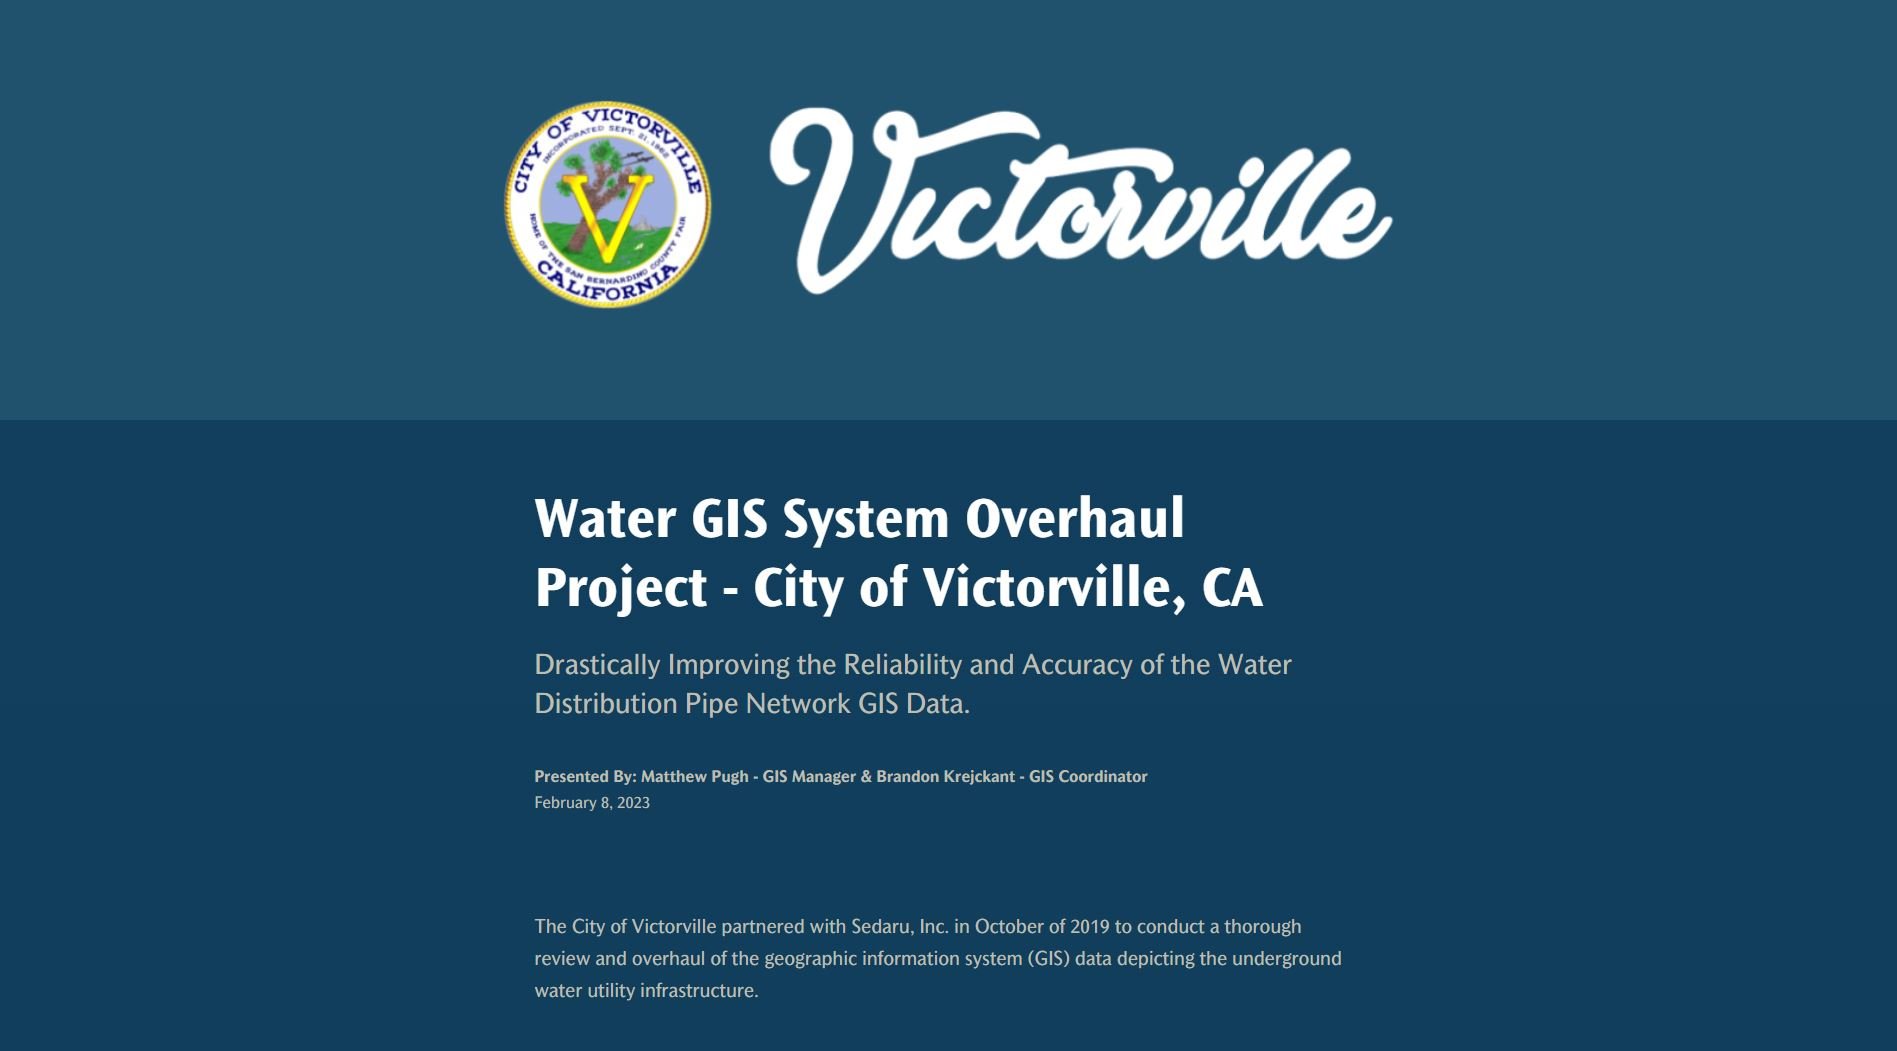 Water System Overhaul Project - City of Victorville - Created by Matthew Pugh